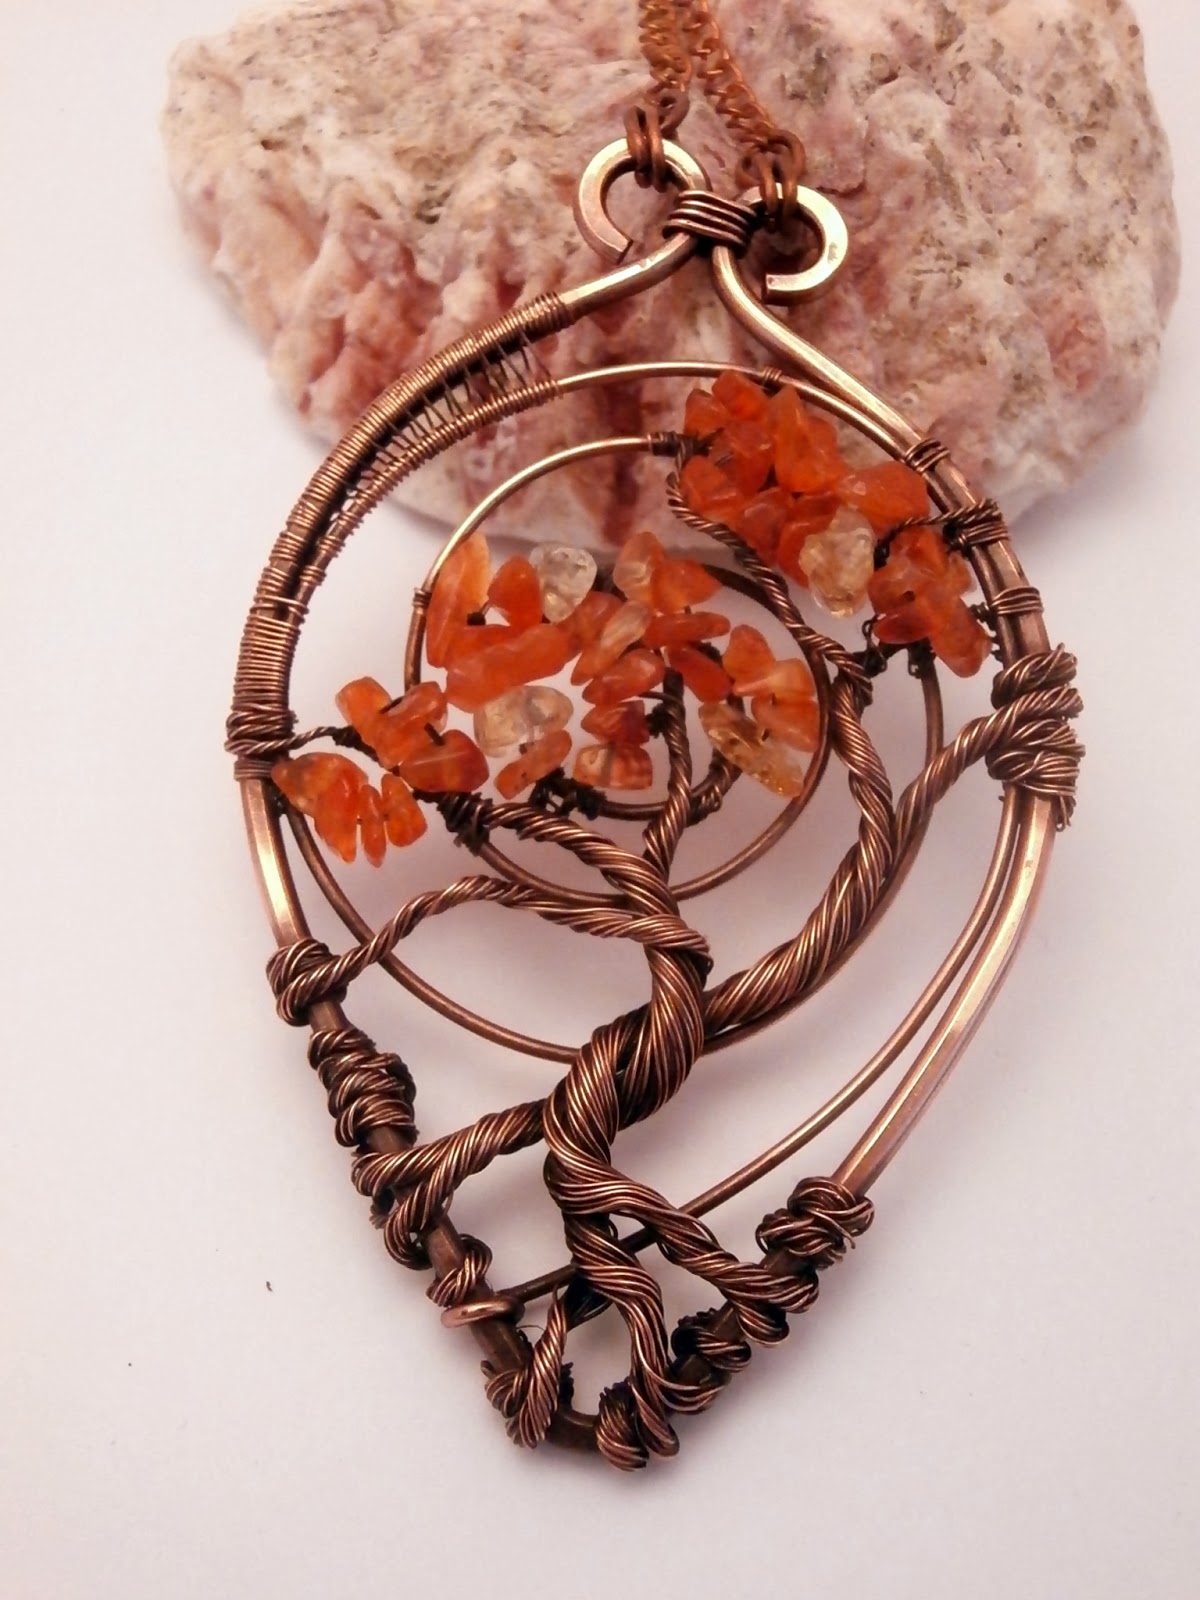 Perfectly Twisted Handmade Wire Wrapped Beaded and Gemstone Jewelry: The Latest Grove ...1200 x 1600